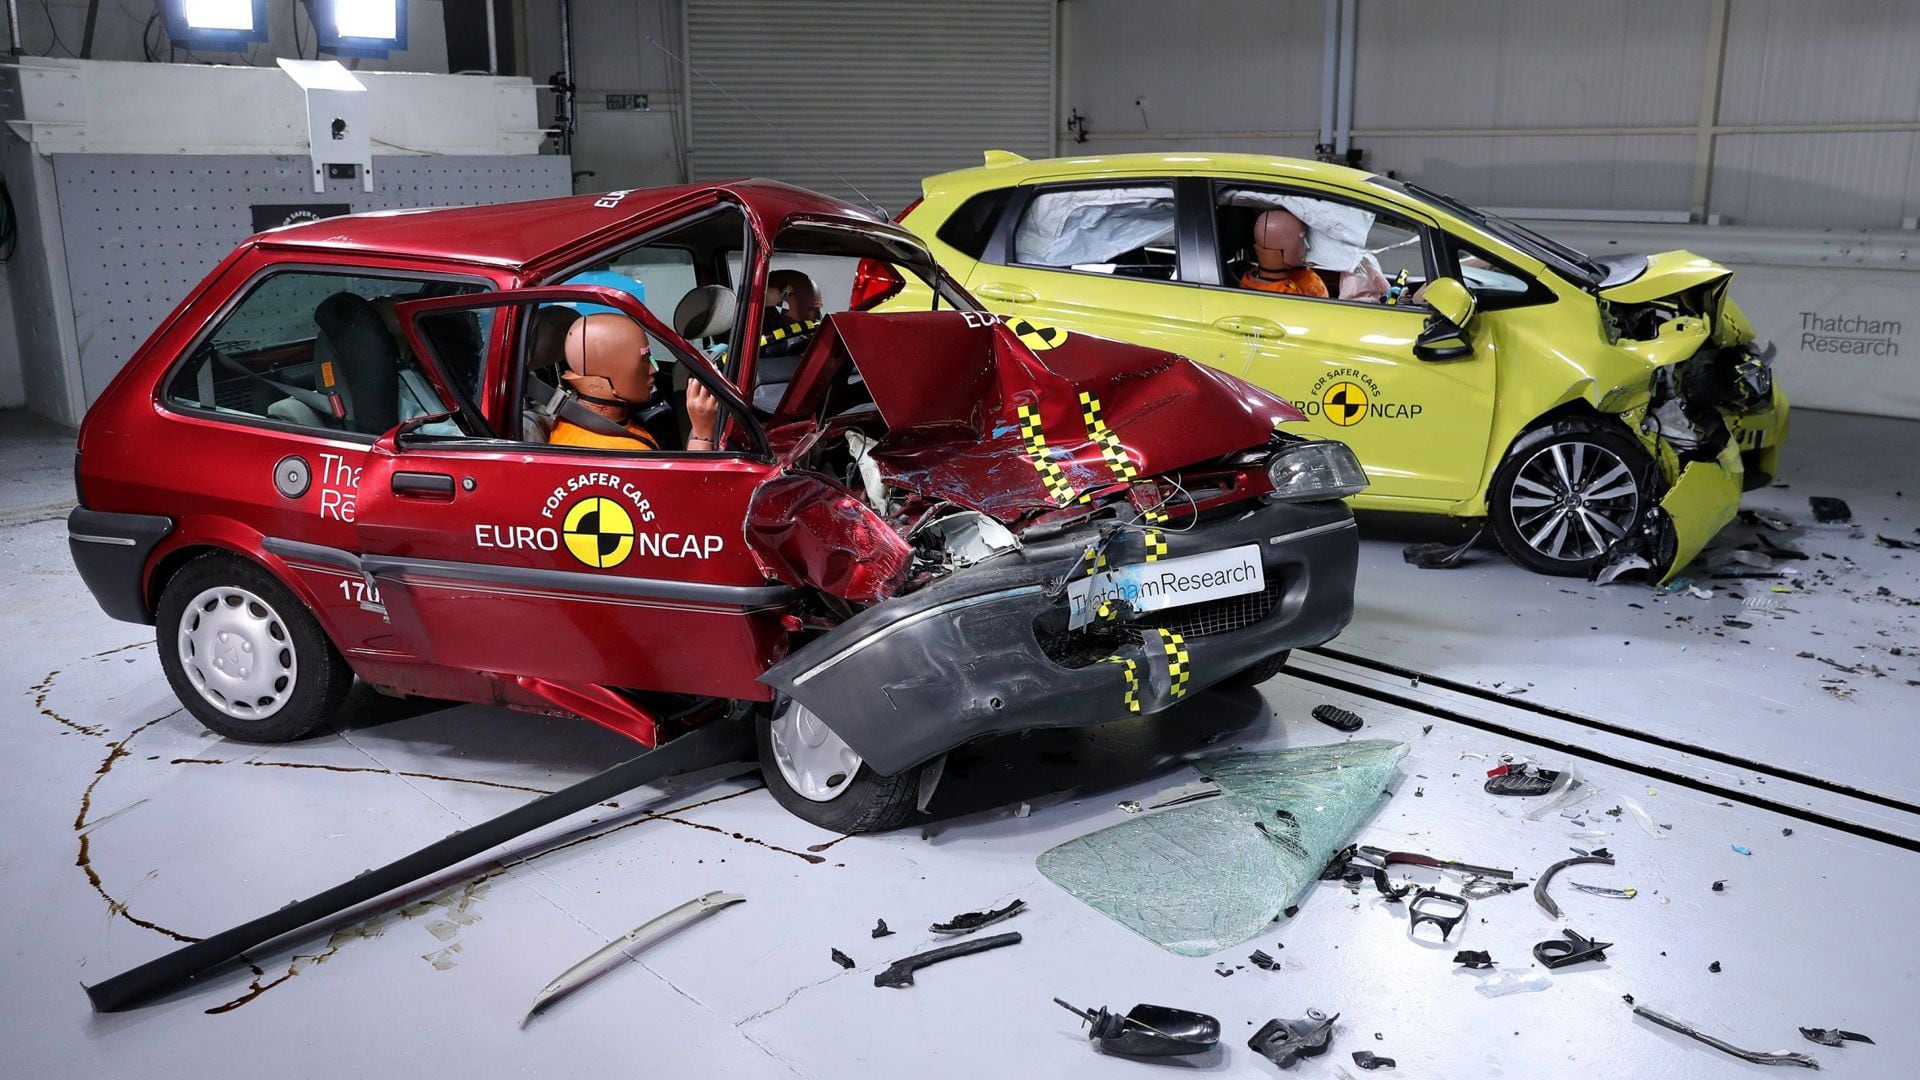 Several collisions are carried out per week at the ADAC laboratory